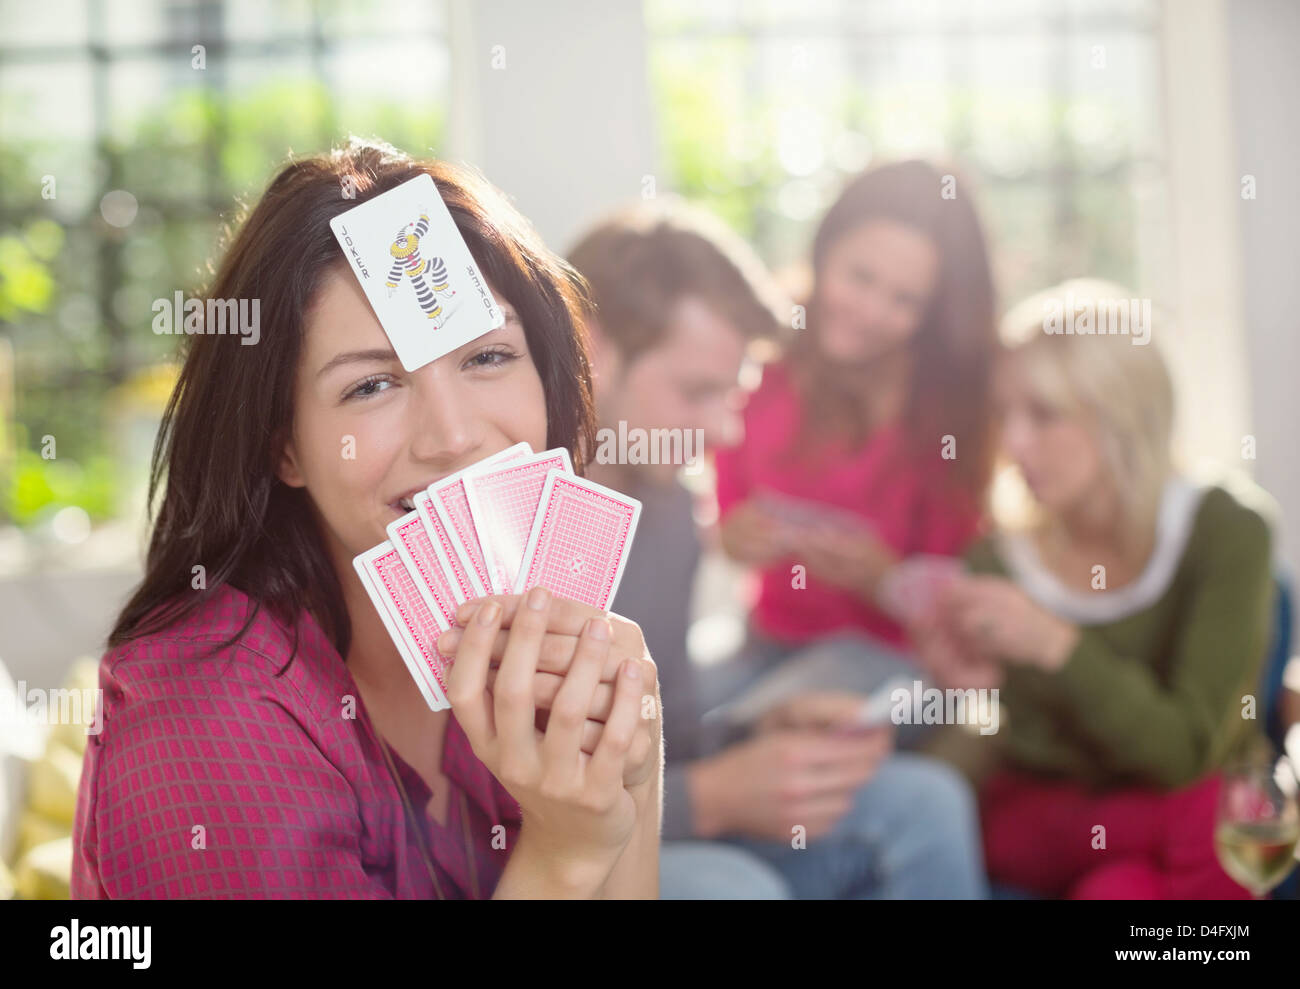 Smiling woman playing card game Banque D'Images